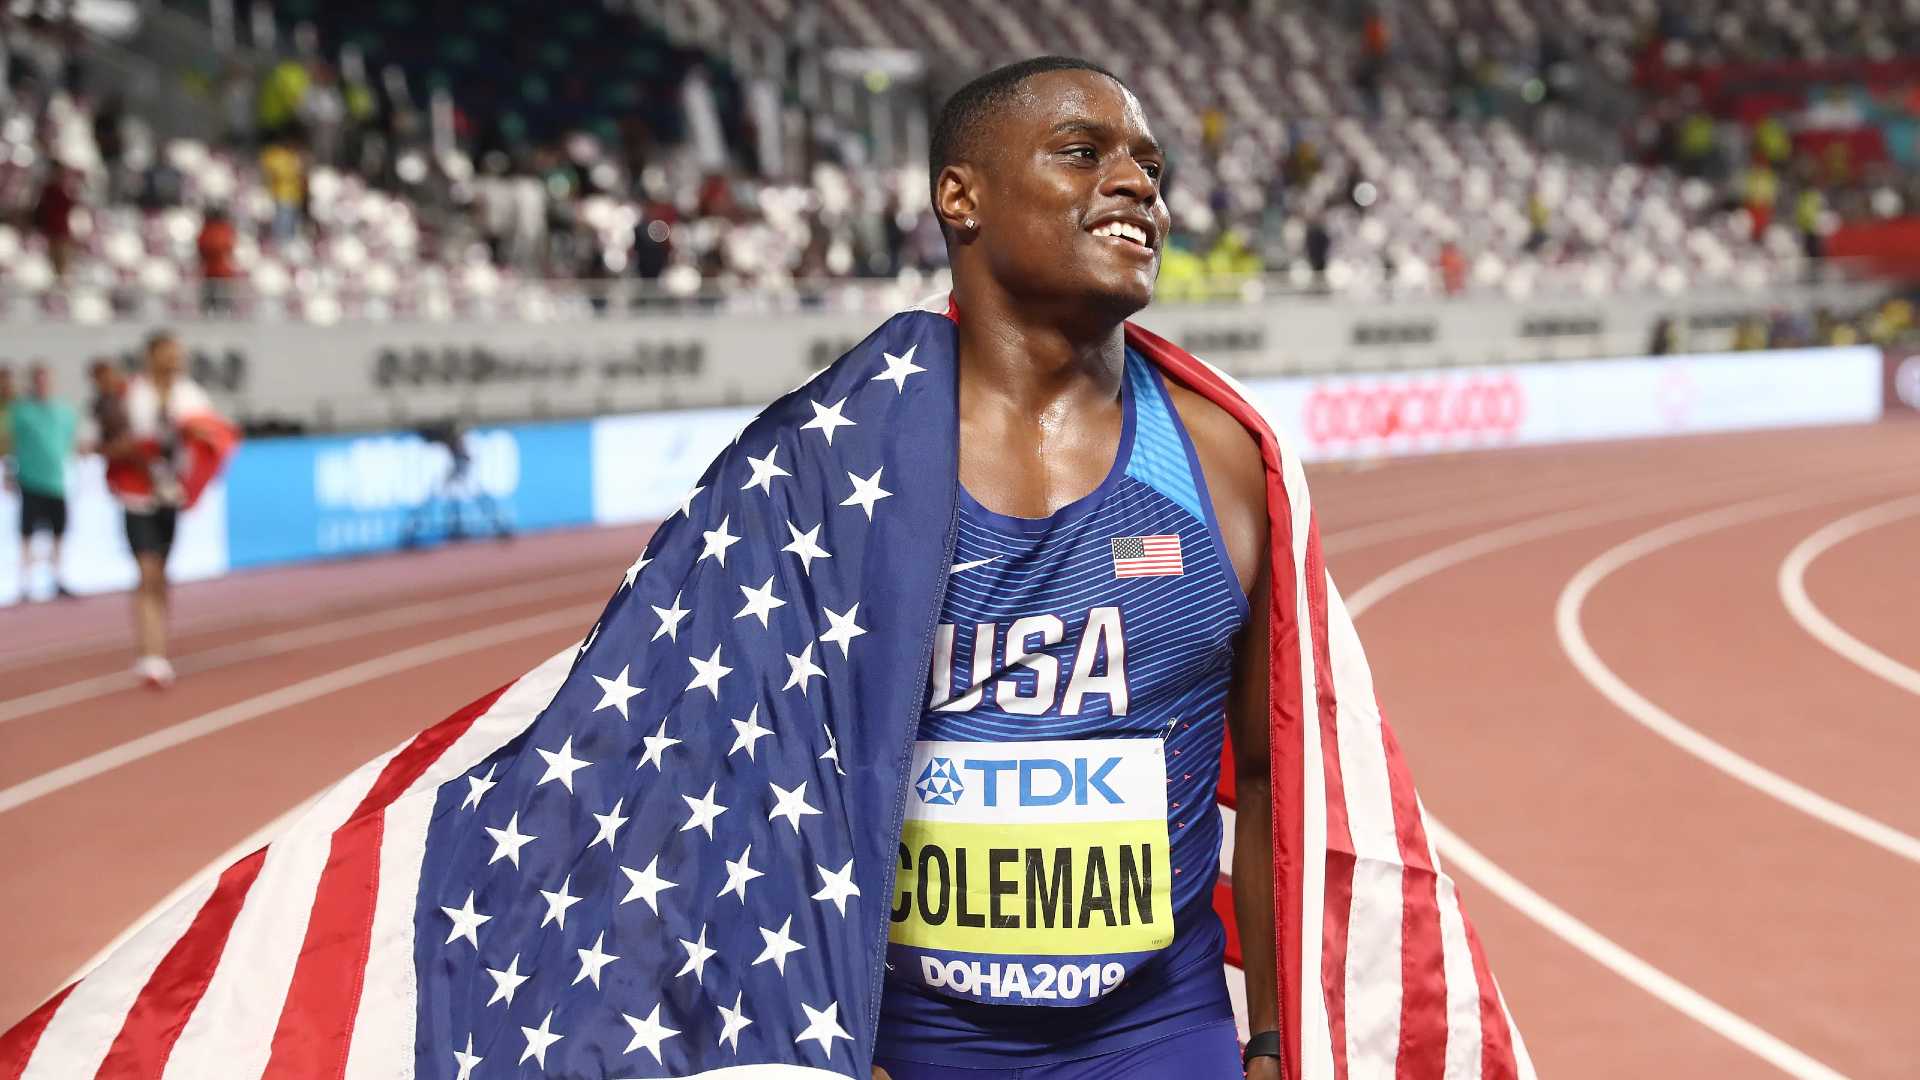 Christian Coleman elated after his victory at the World Championships 2019(Coleman in a file photo)